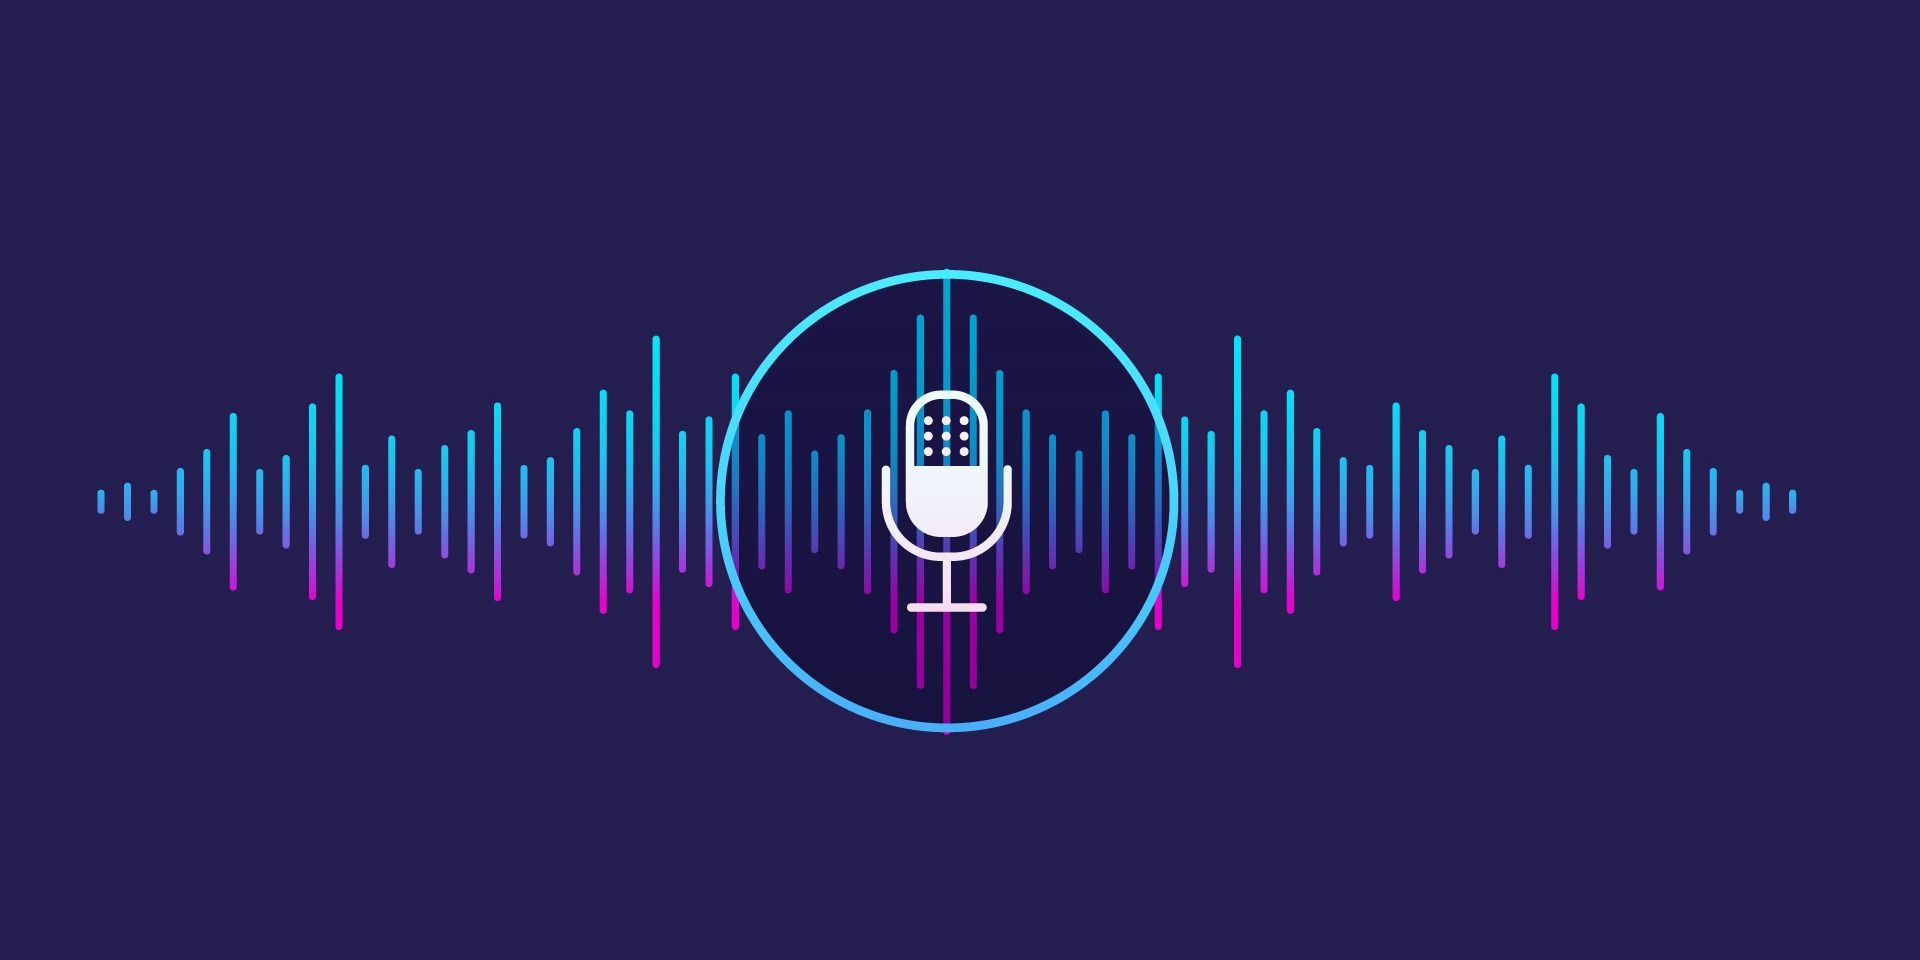 Microphone Symbol For Voice Assistant